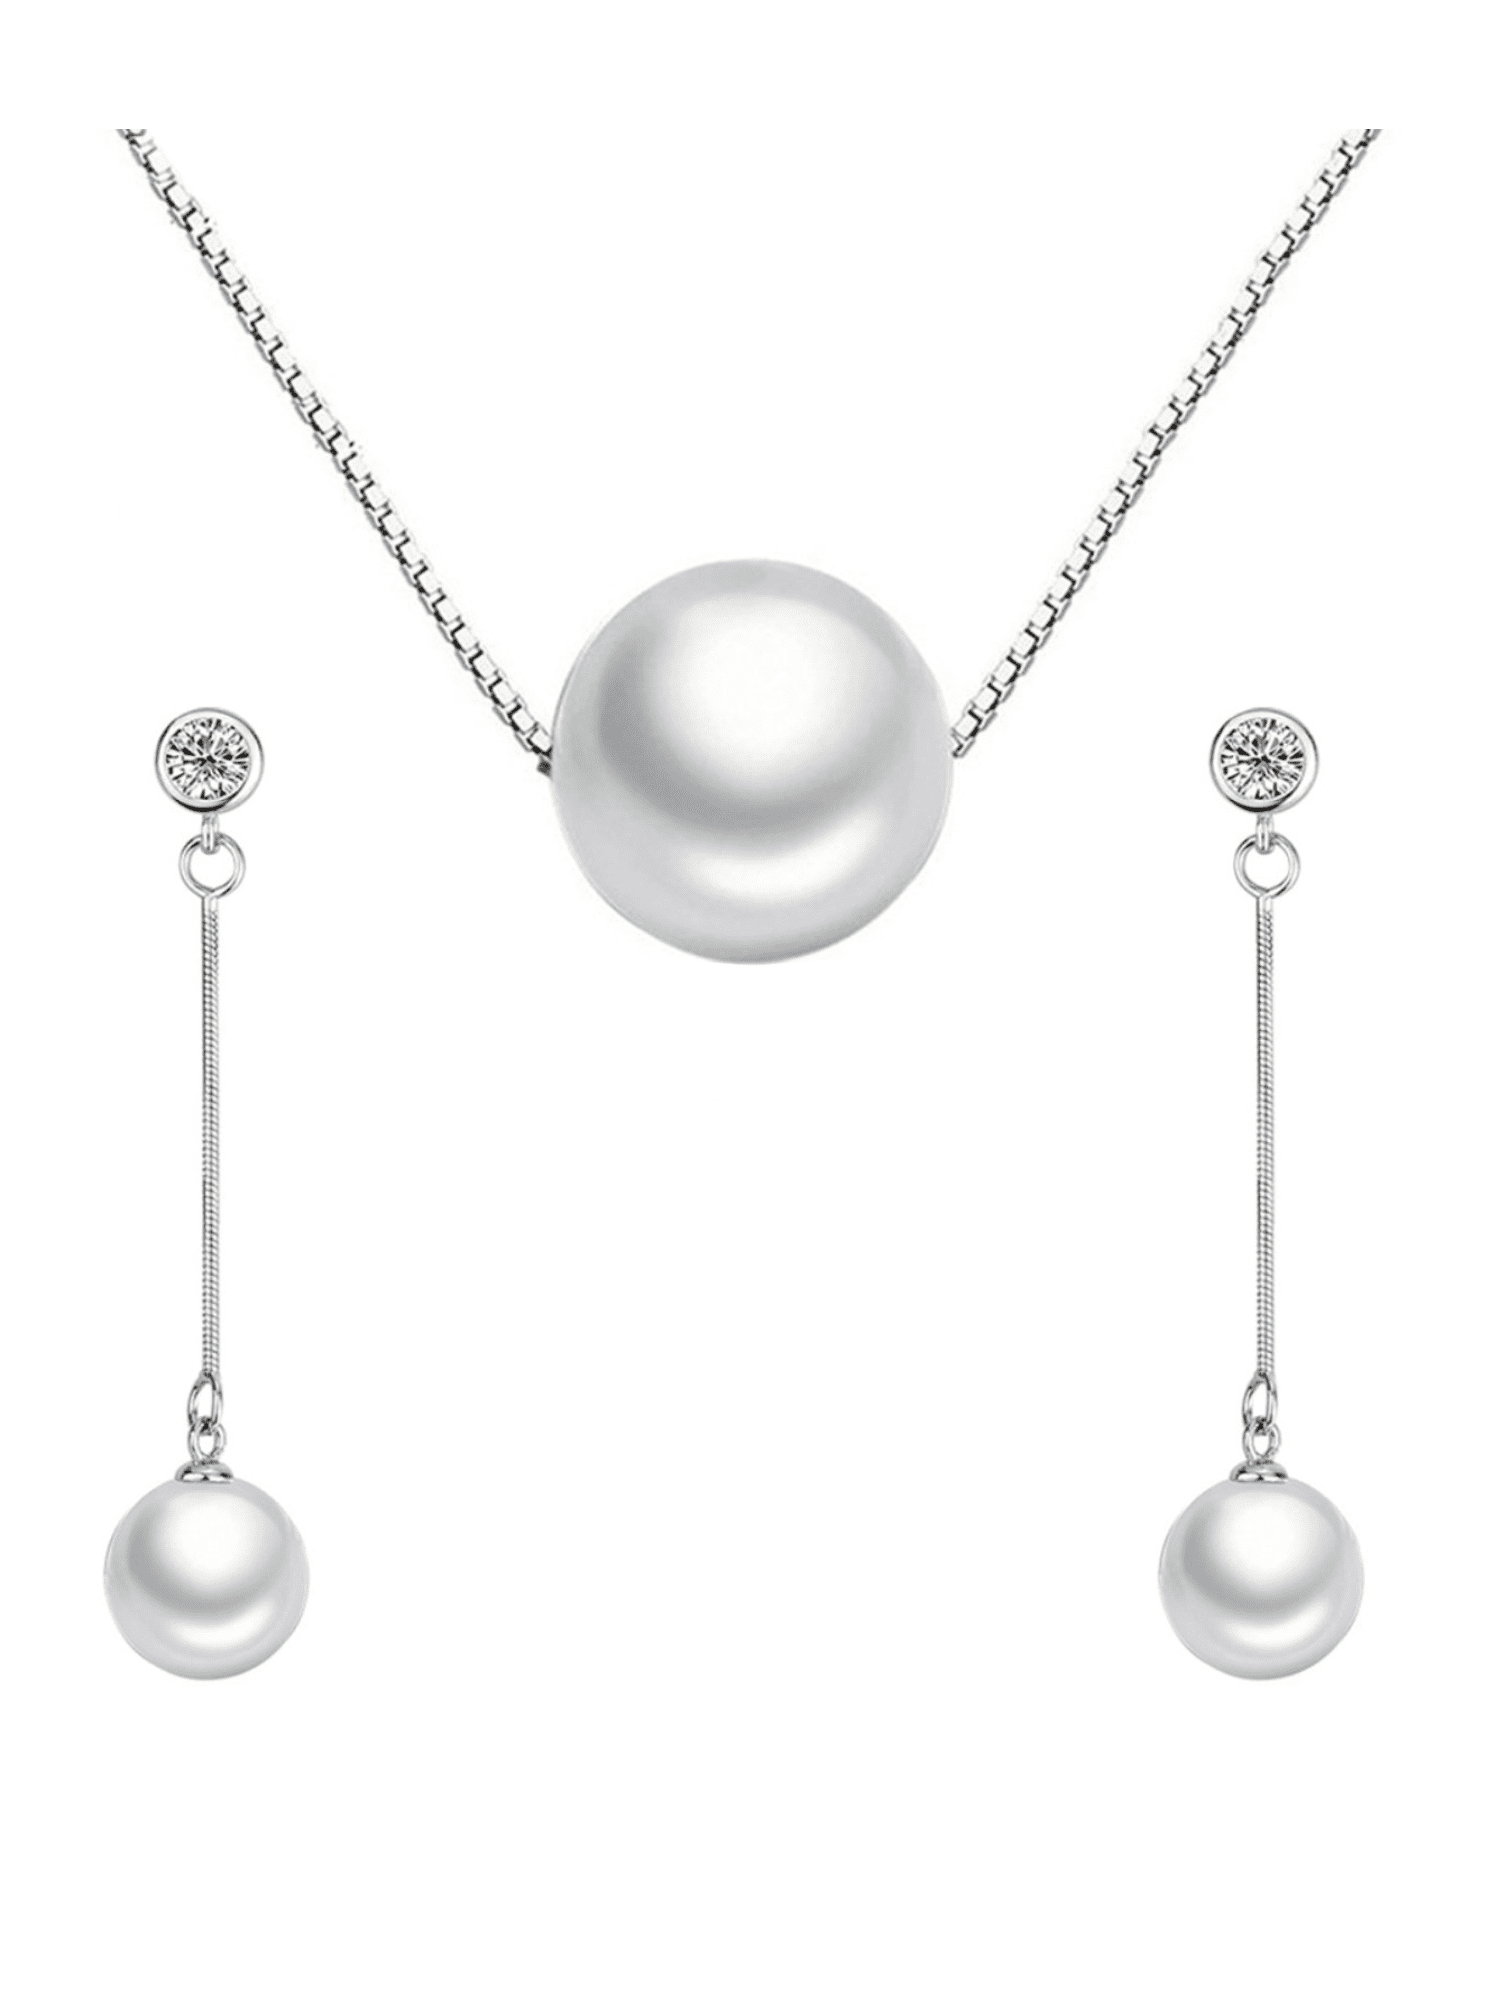 EVER FAITH 925 Sterling Silver CZ AAA Freshwater Cultured Pearl Elegant Bride Necklace Earrings Set Clear